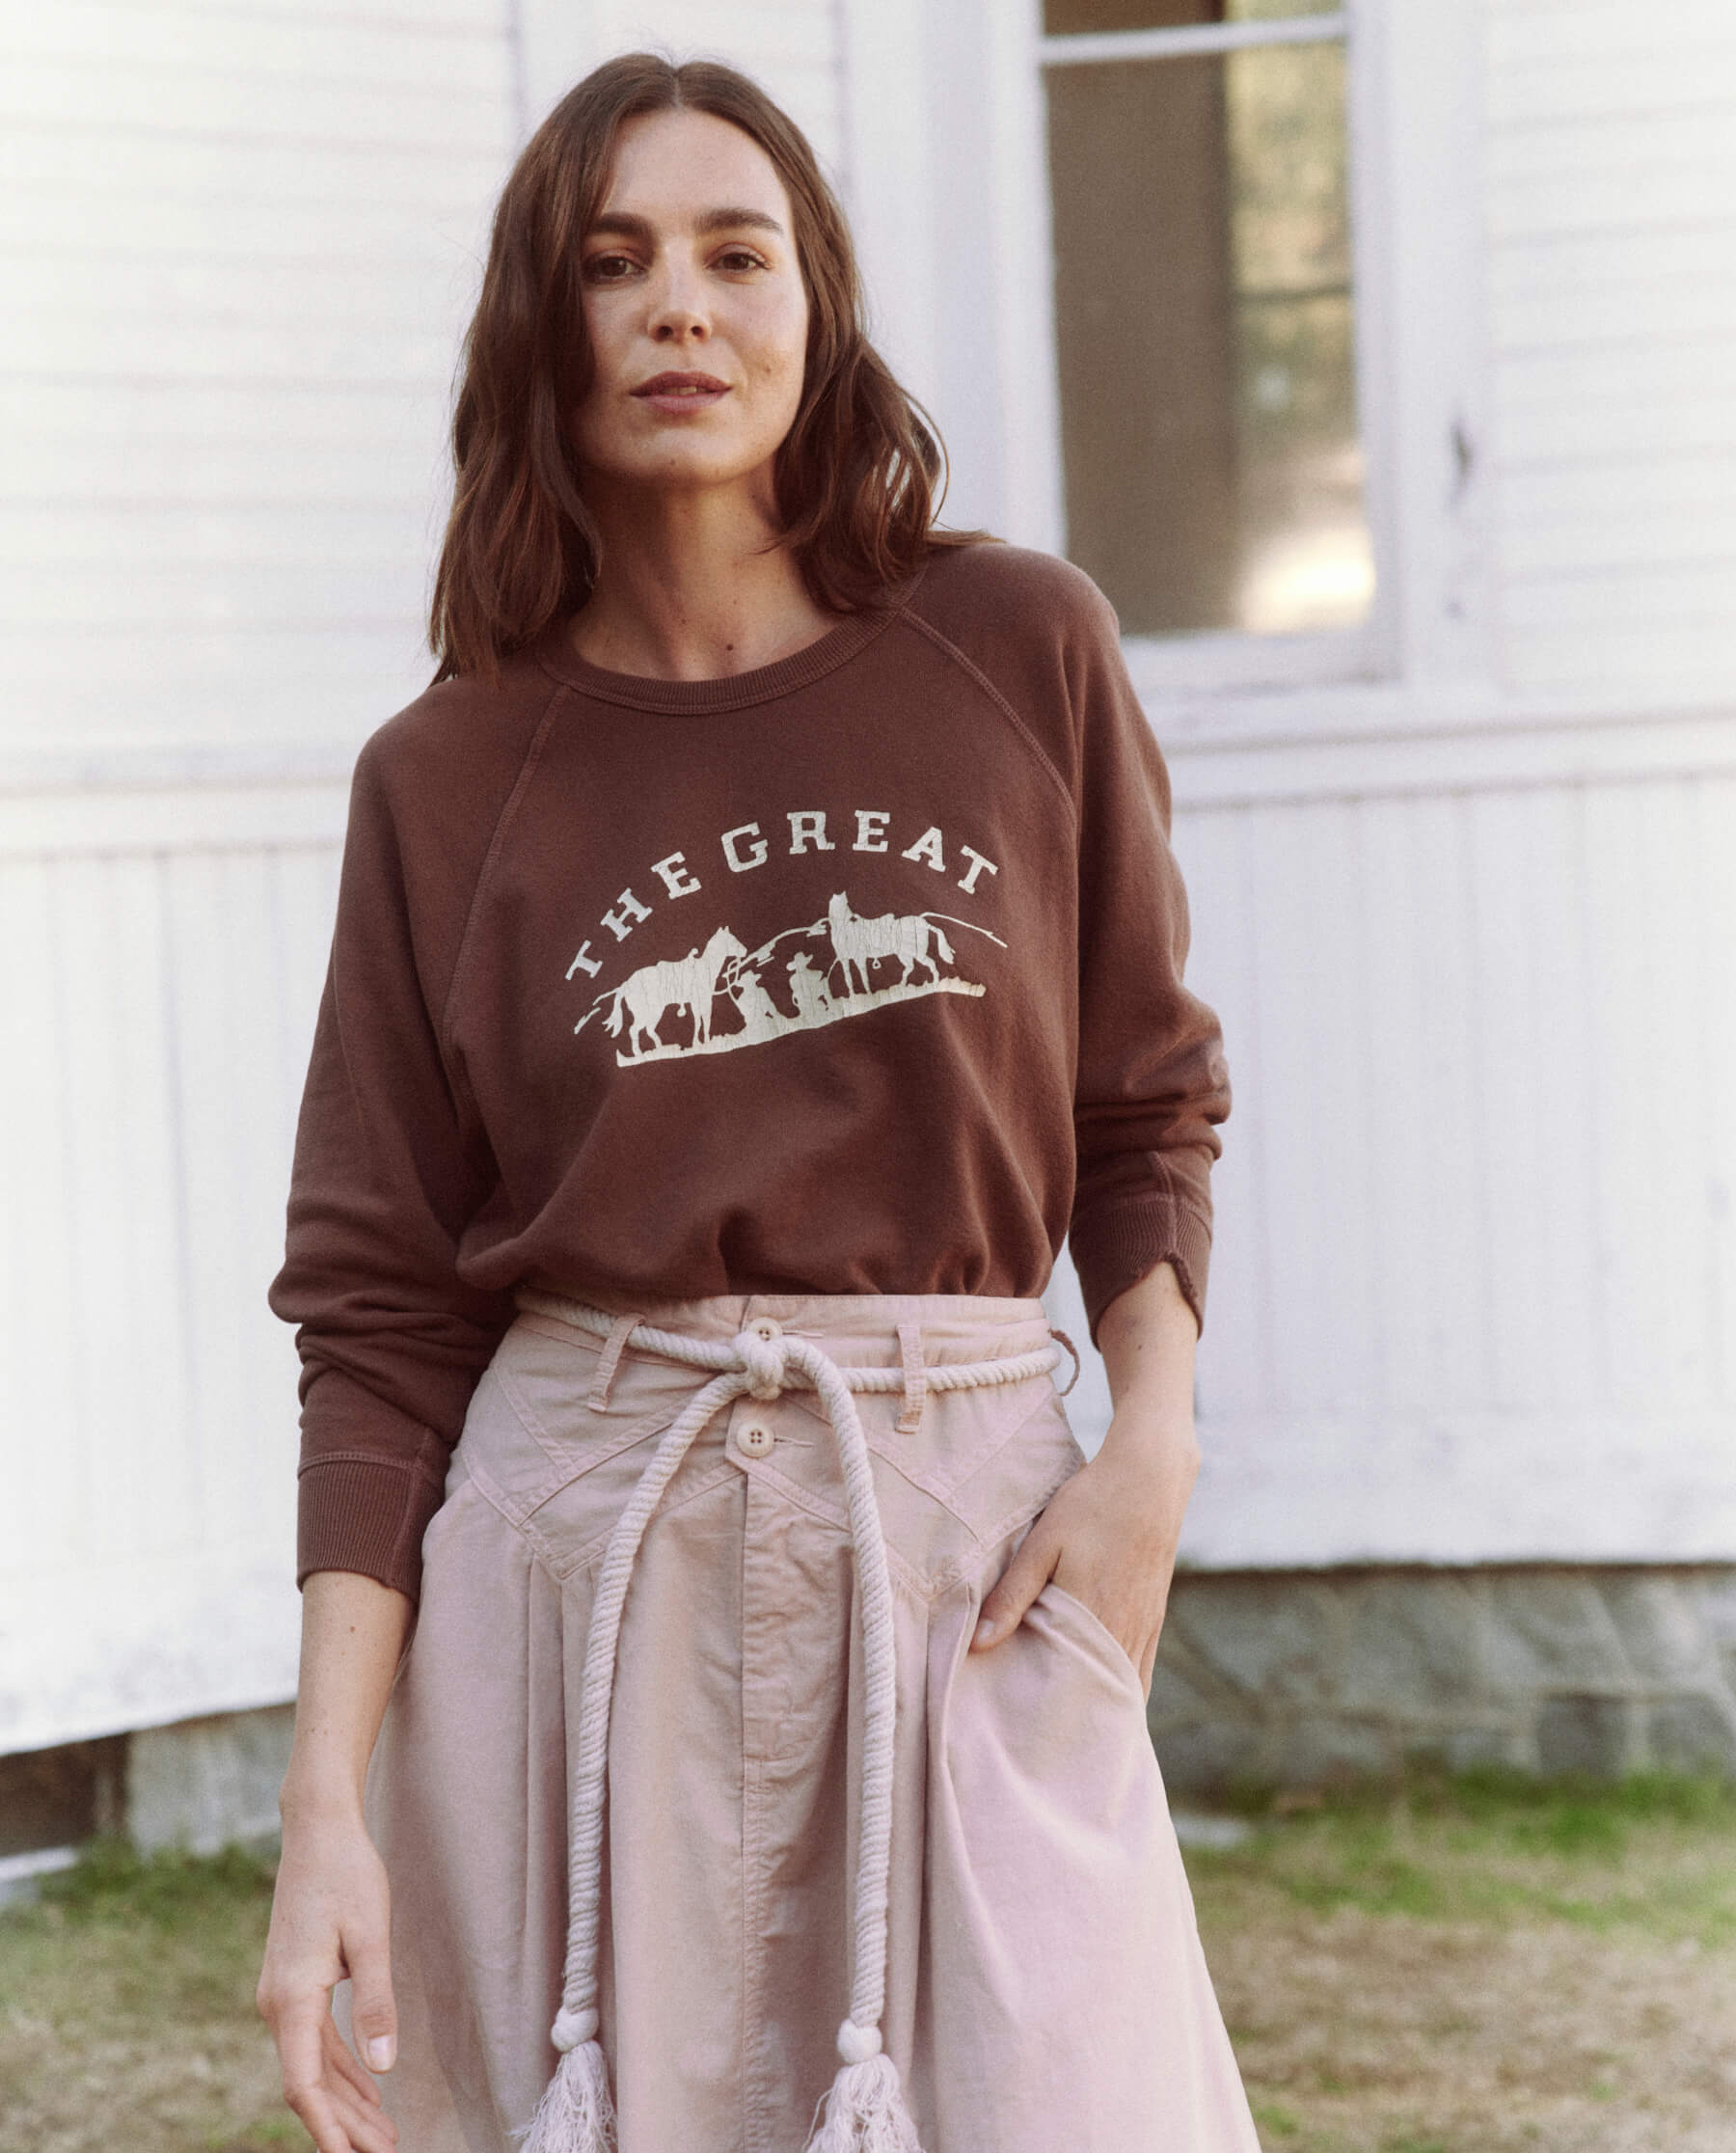 The College Sweatshirt. Graphic -- Hickory with Gaucho Graphic